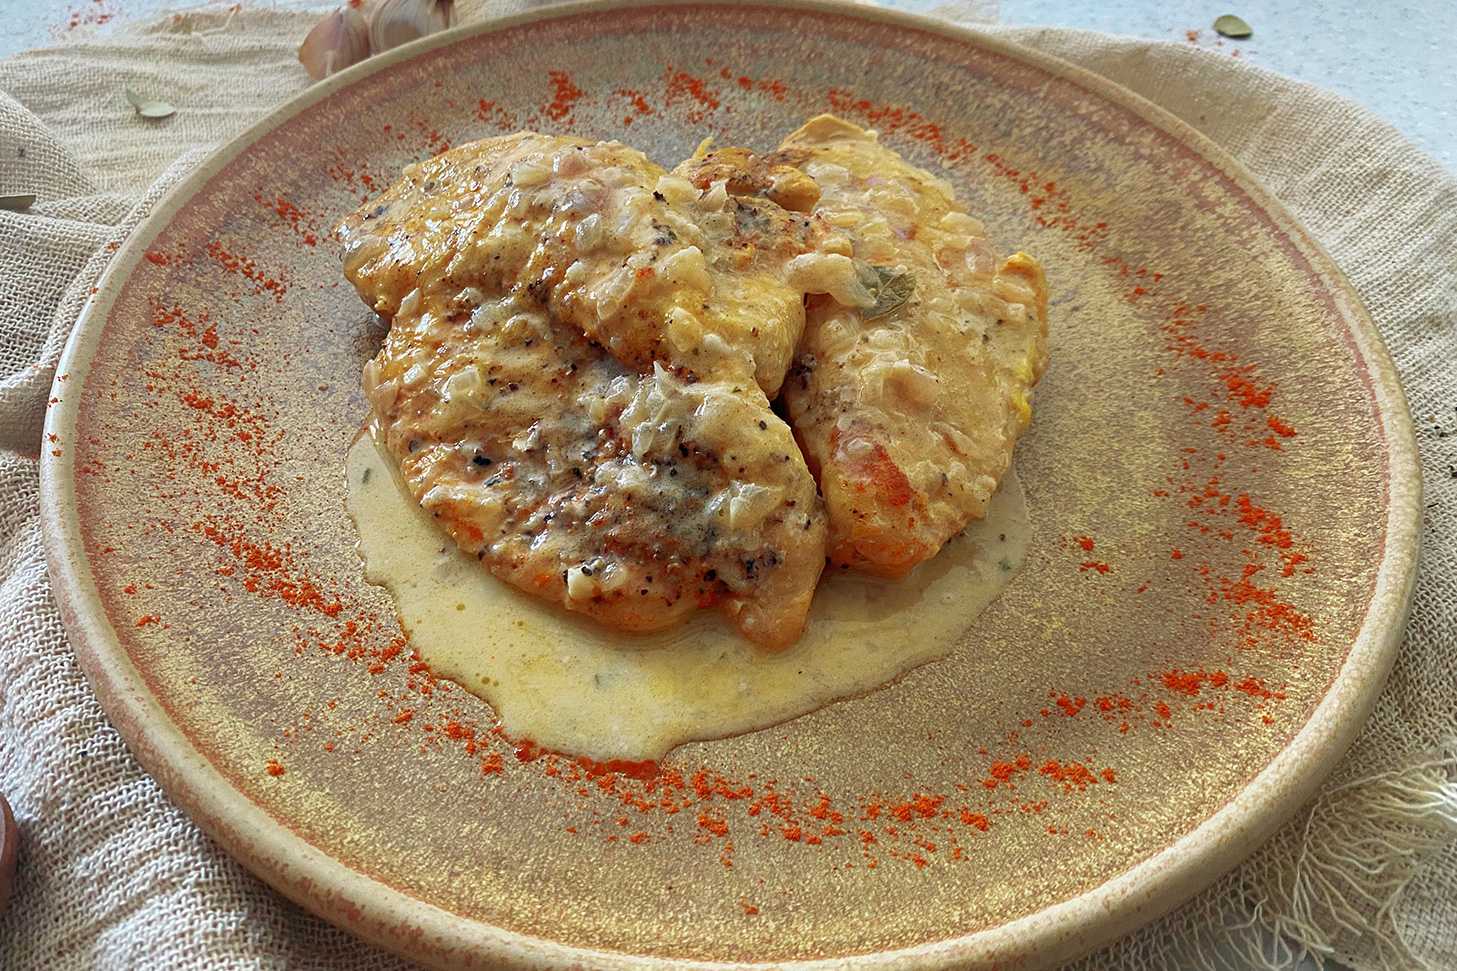 Three chicken fillets with creamy sauce on top and paprika on side in brown plate